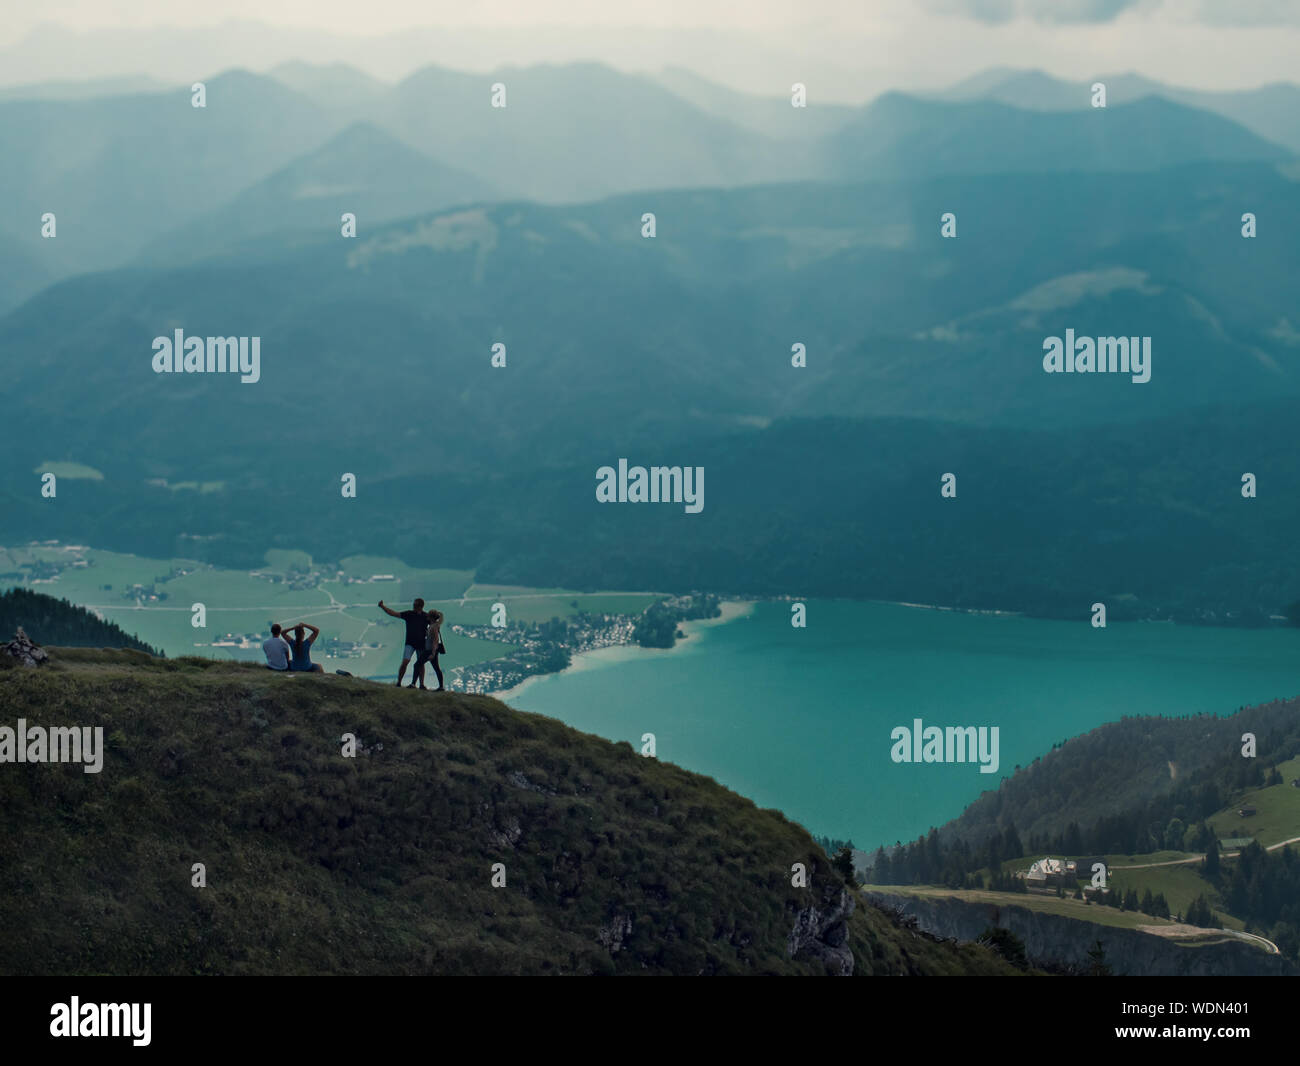 Family on top of a mountain in Austria Europe with lake 'Wolfgangsee' Stock Photo